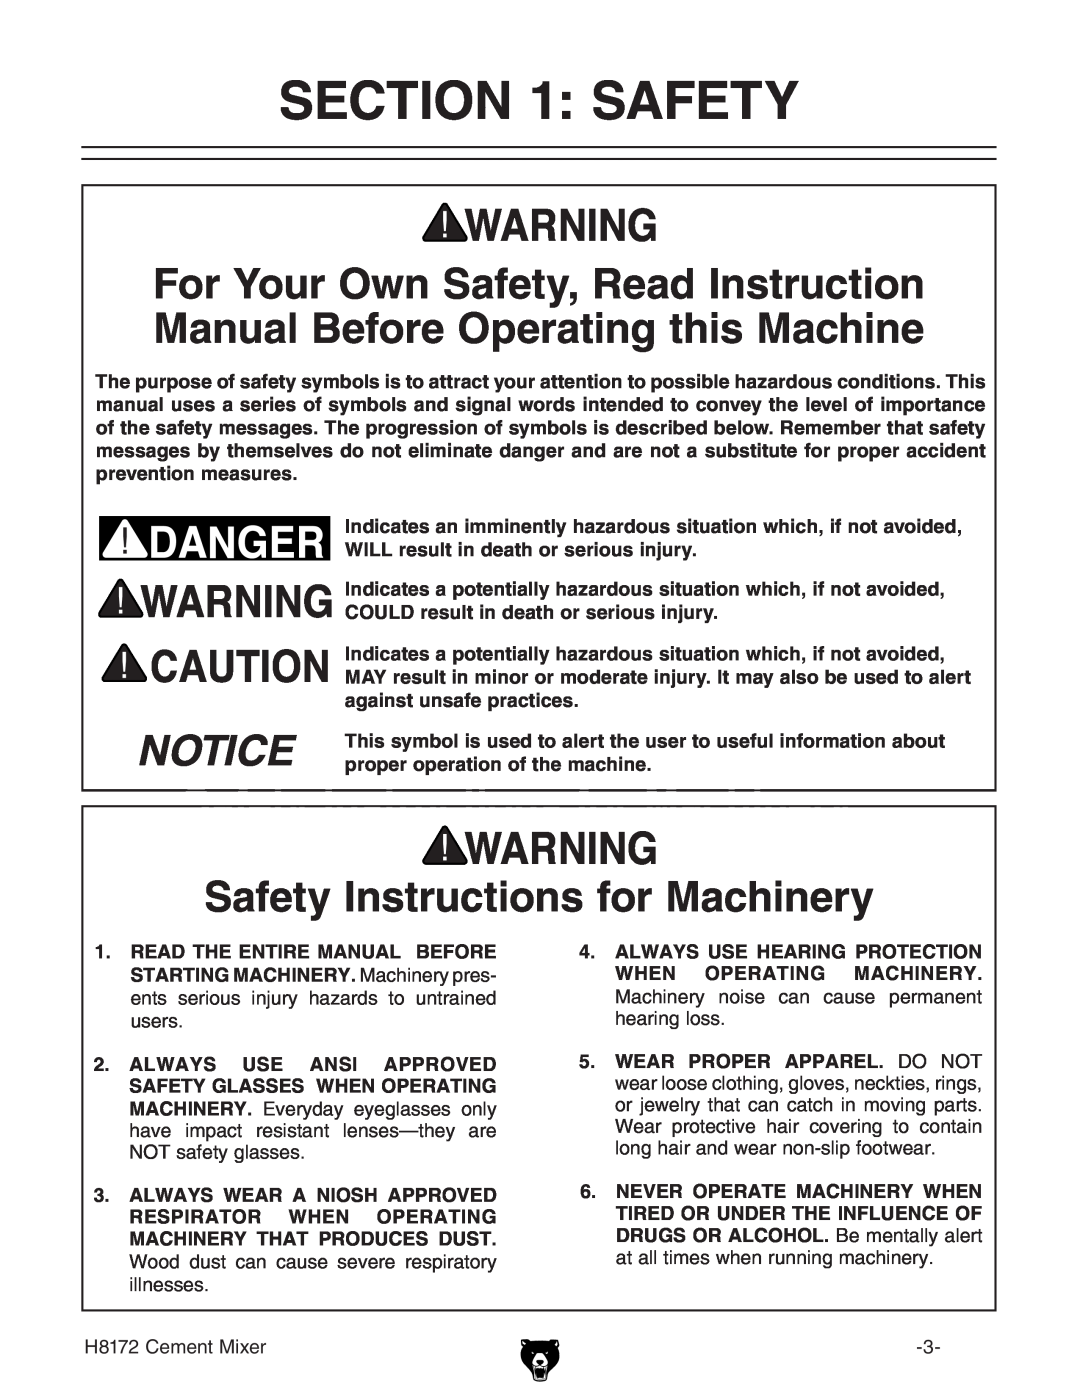 Grizzly owner manual Safety Instructions for Machinery, H8172 Cement Mixer 